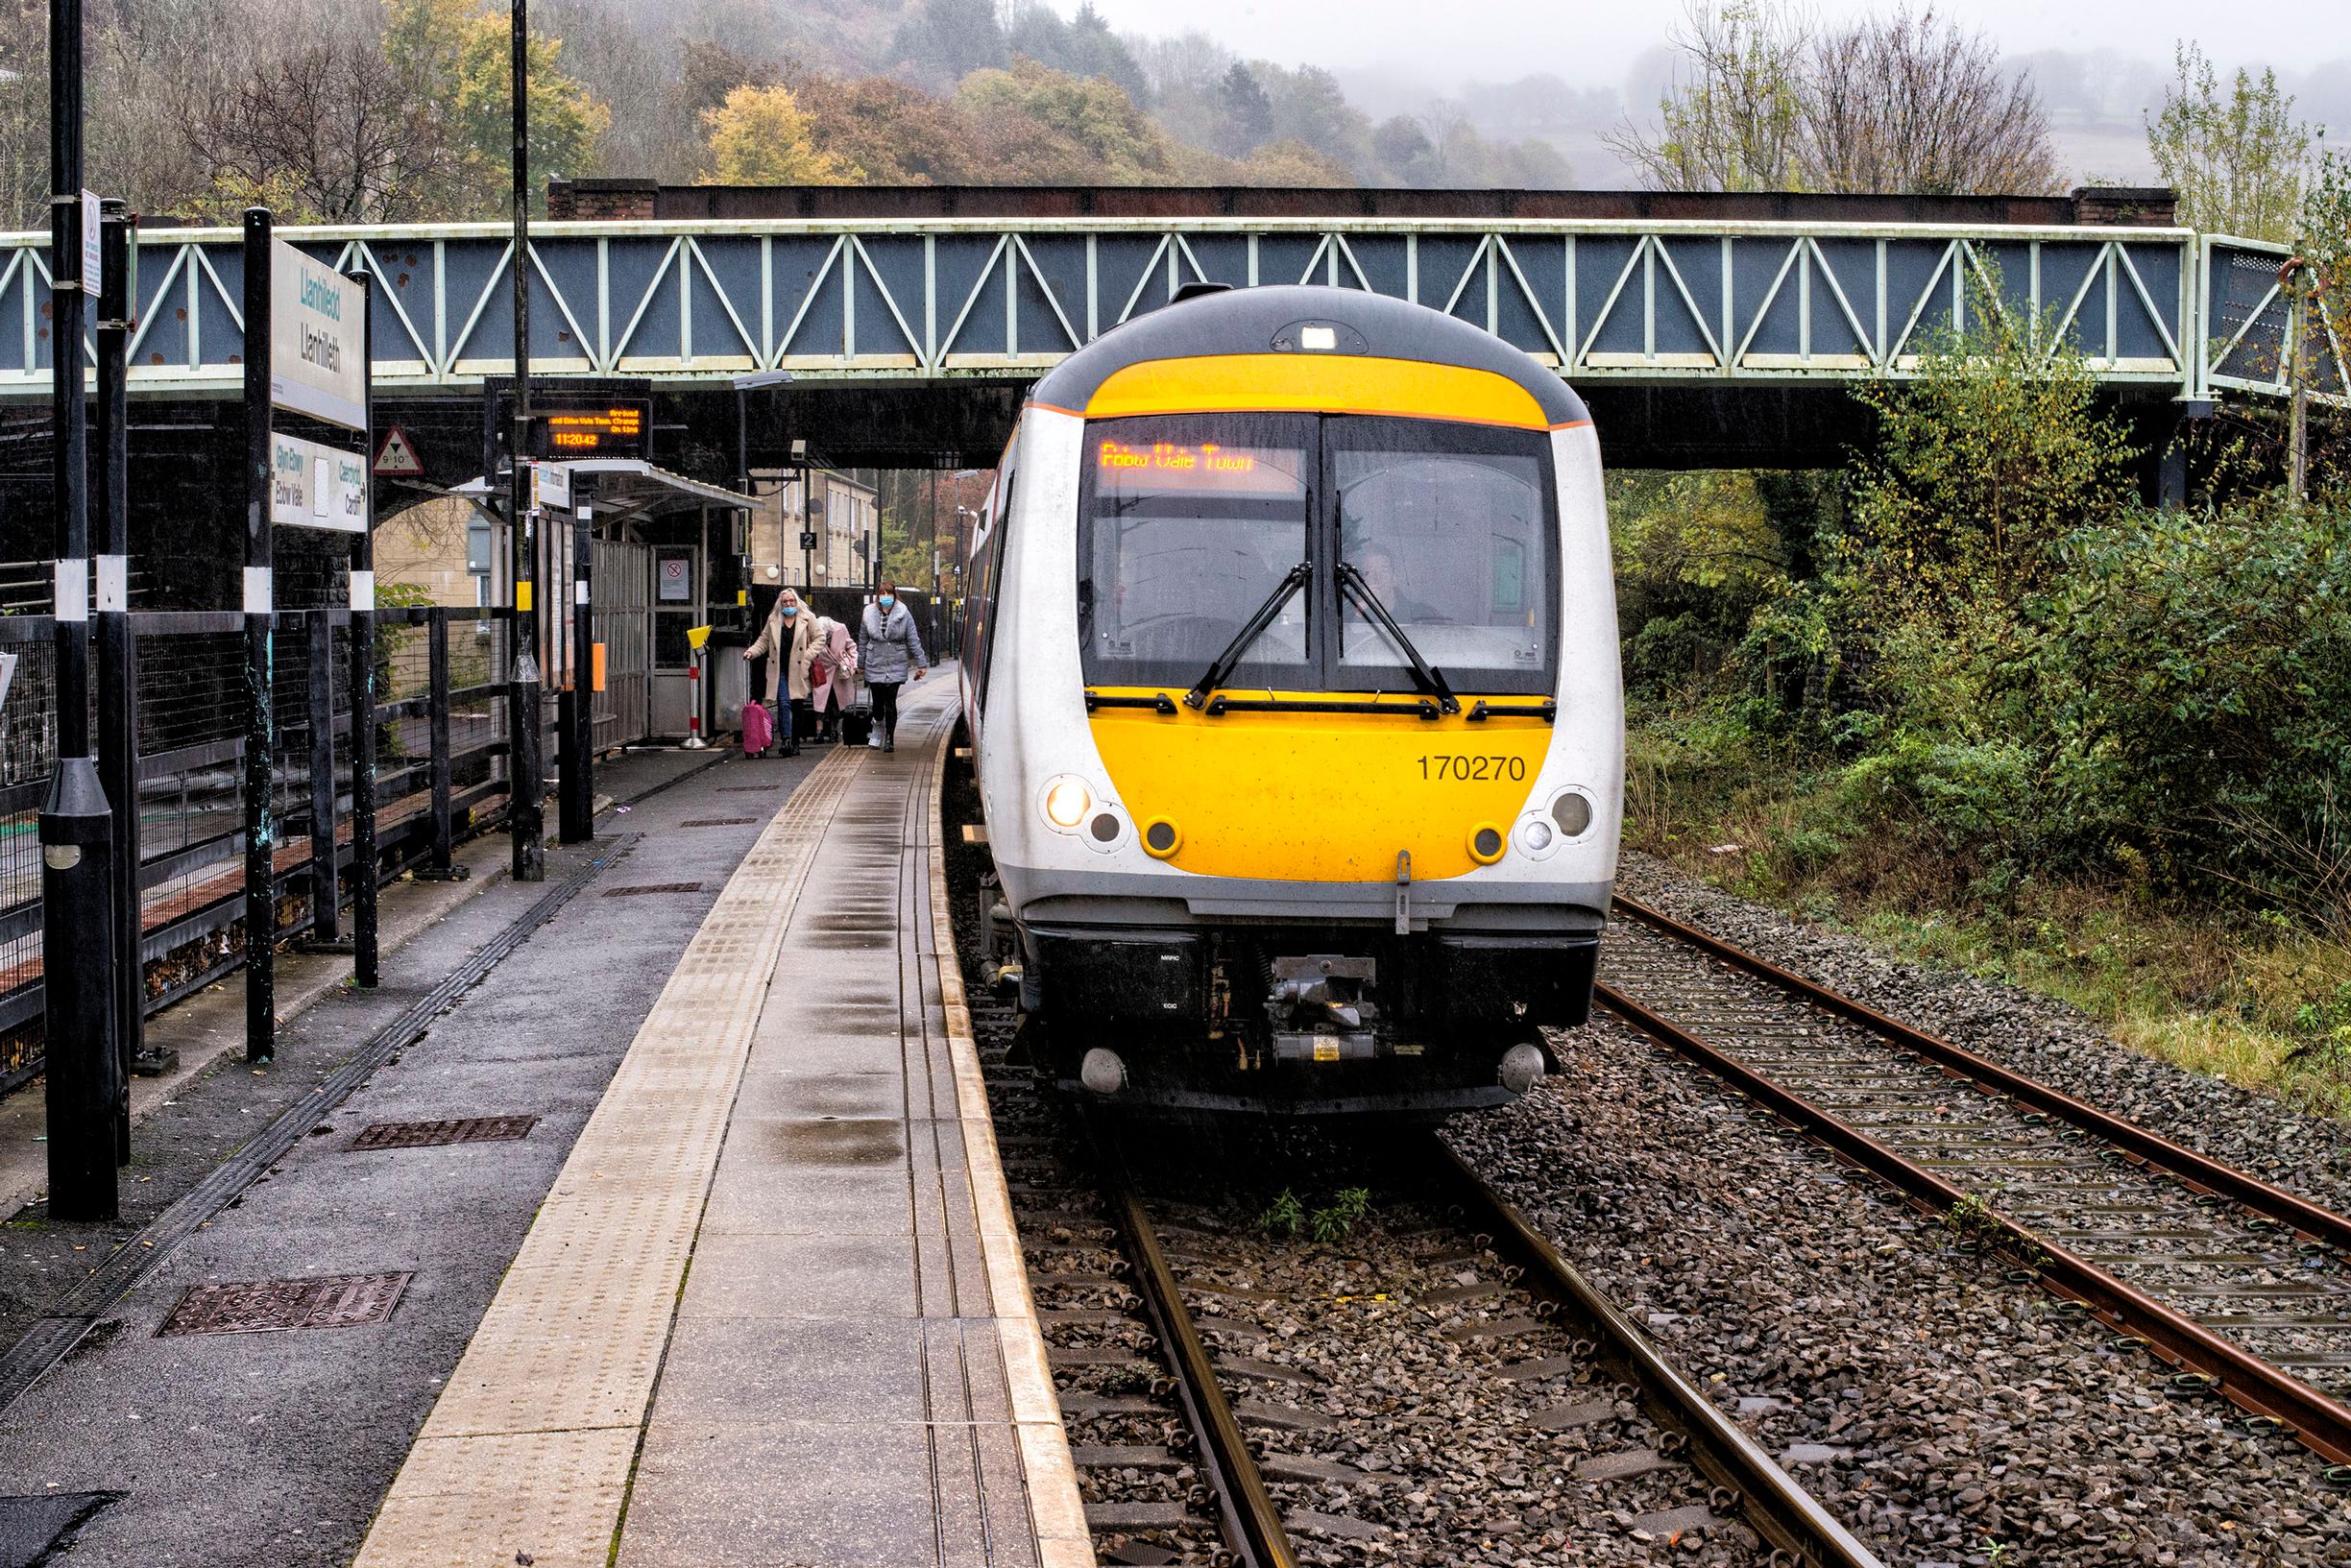 Double tracking the Ebbw Vale line will include another platform at Llanhilleth station